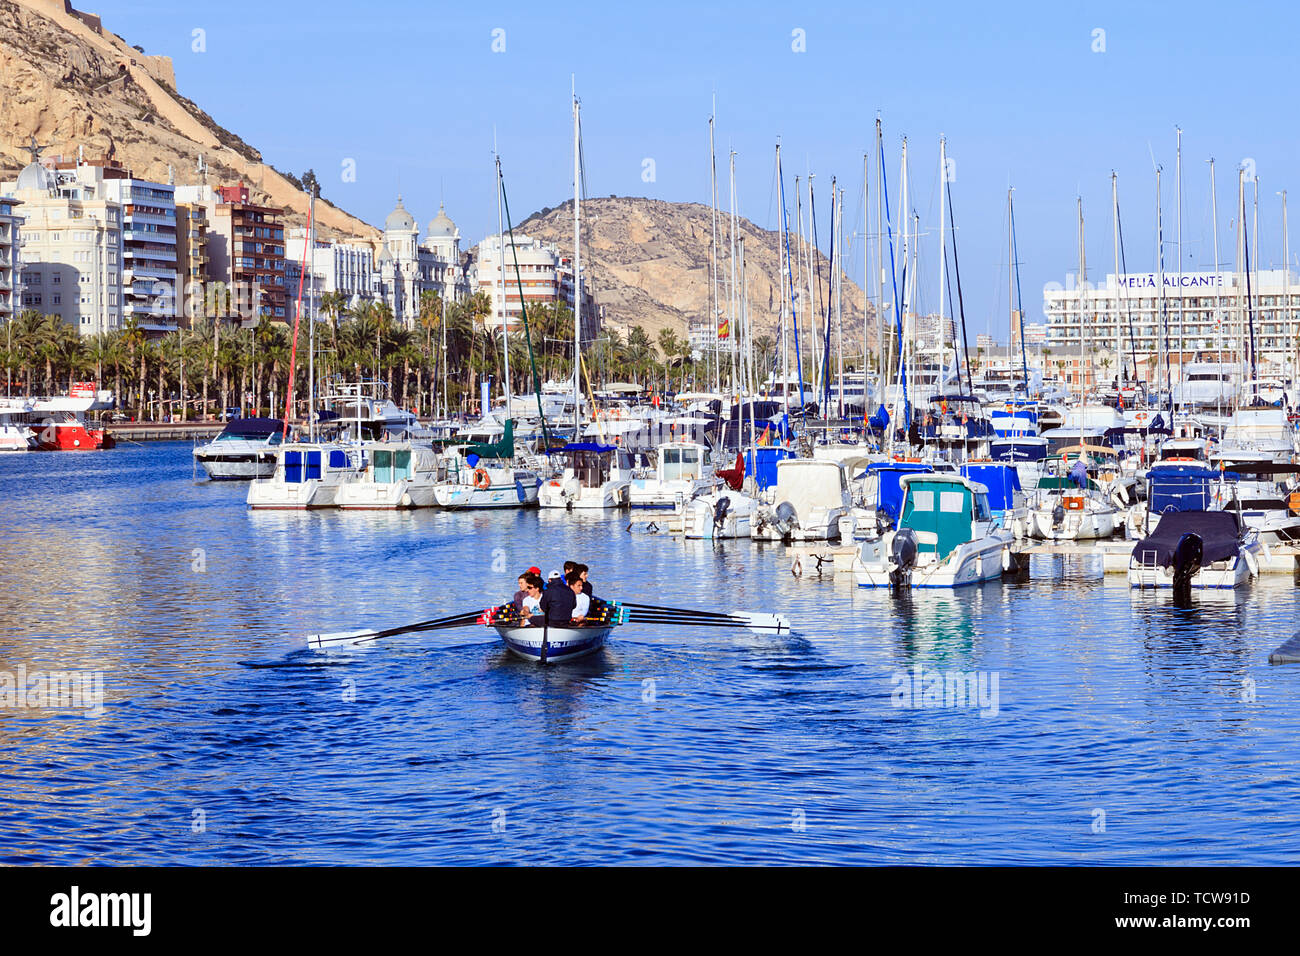 8 man rowing team practicing in Alicante Port, Spain Stock Photo - Alamy